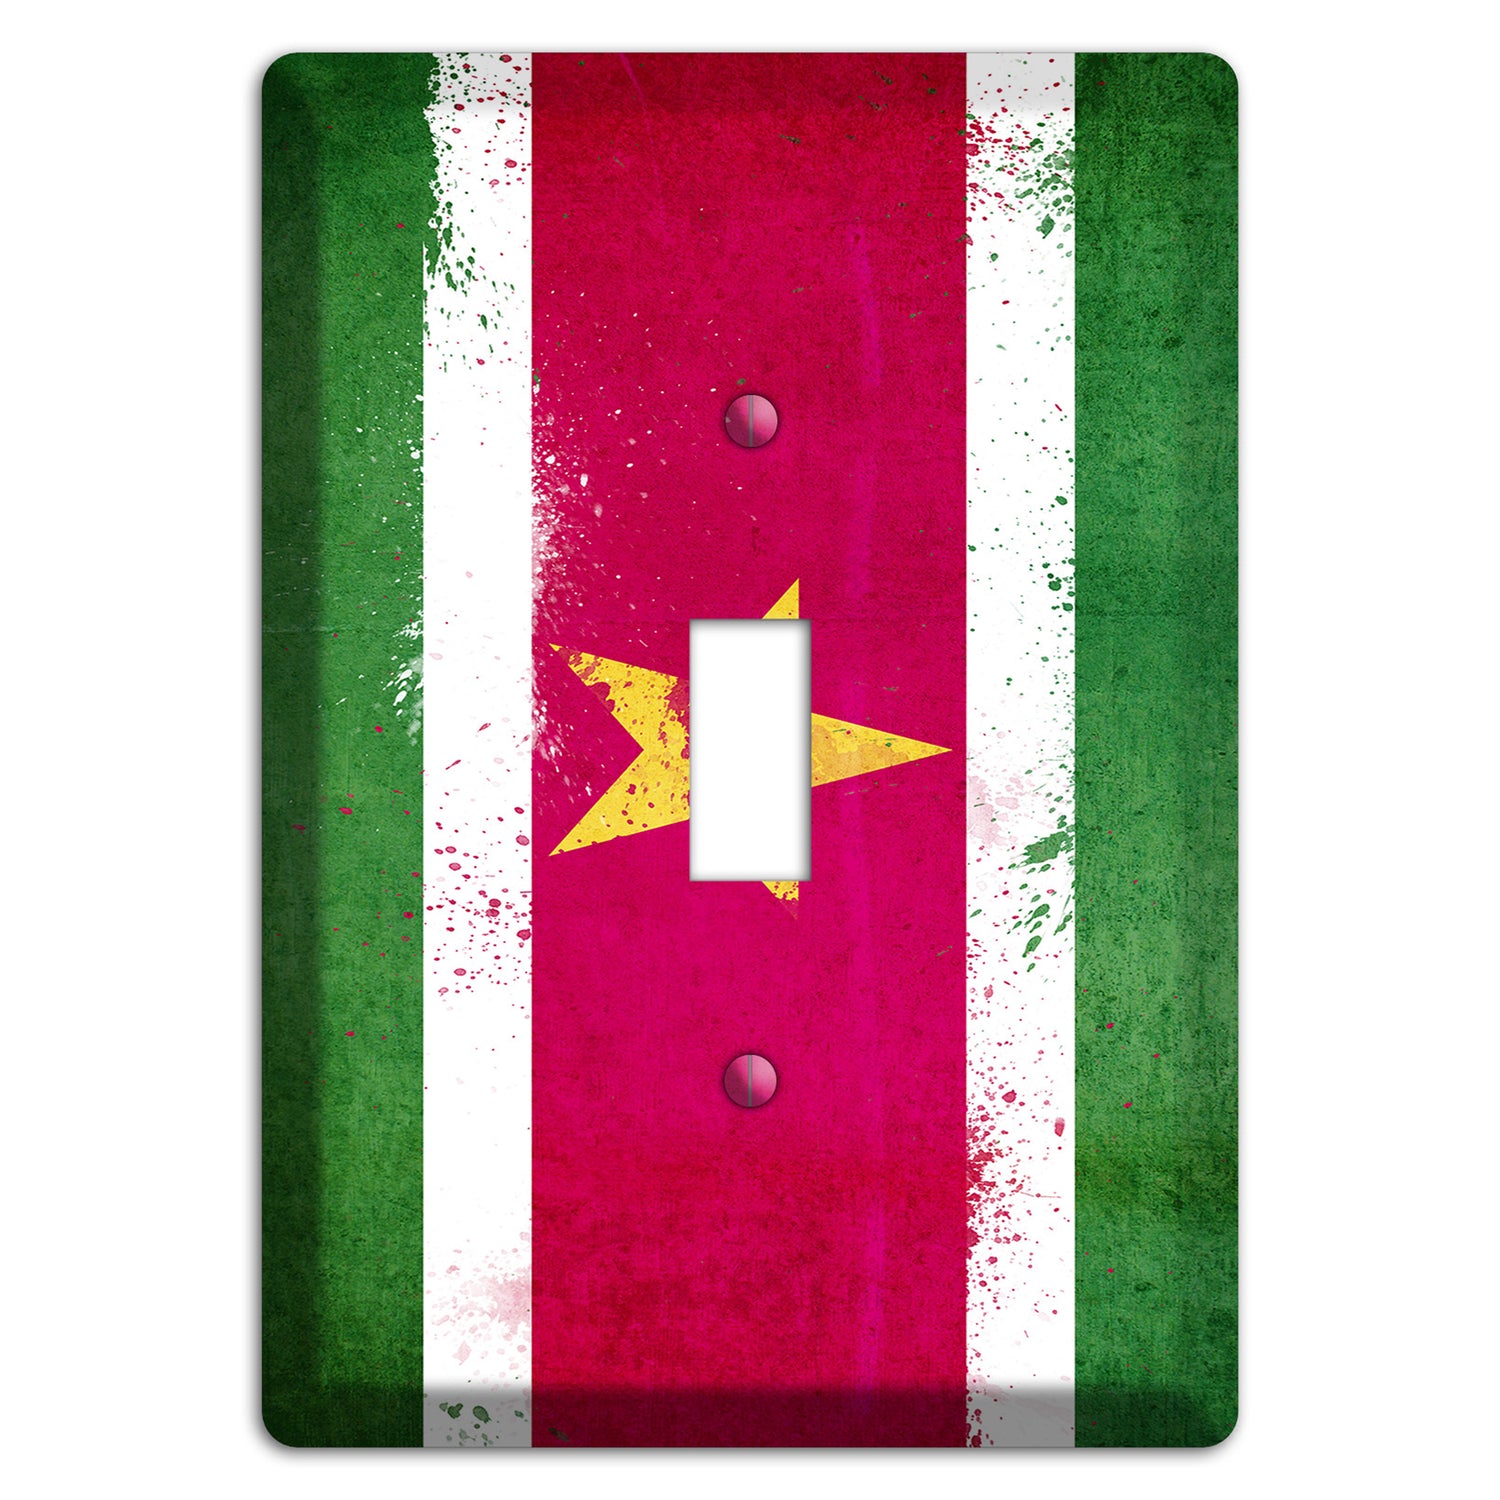 Suriname Cover Plates Cover Plates